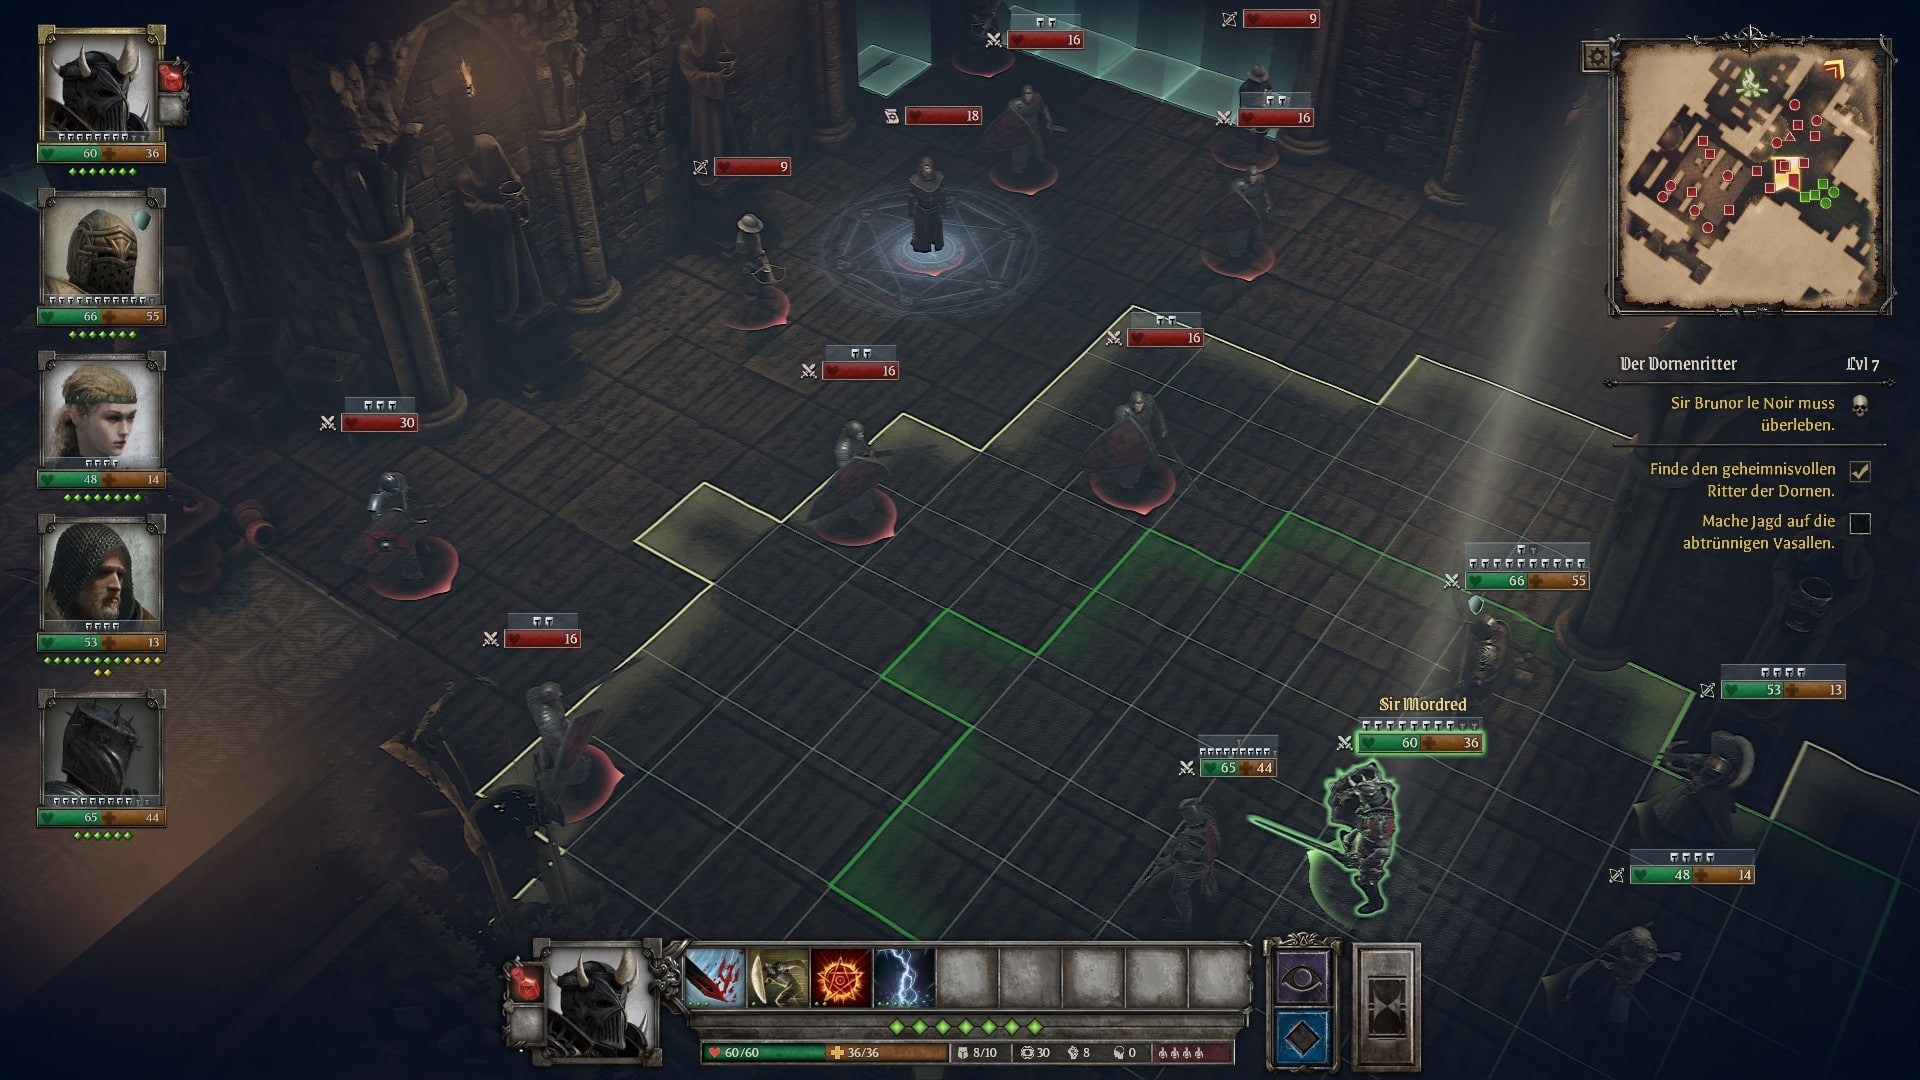 (On contact with the enemy, the game switches to turn mode. At the bottom of the screen we see in green how many action points the selected hero has. Once we have made our group's moves, it's the enemy's turn.)